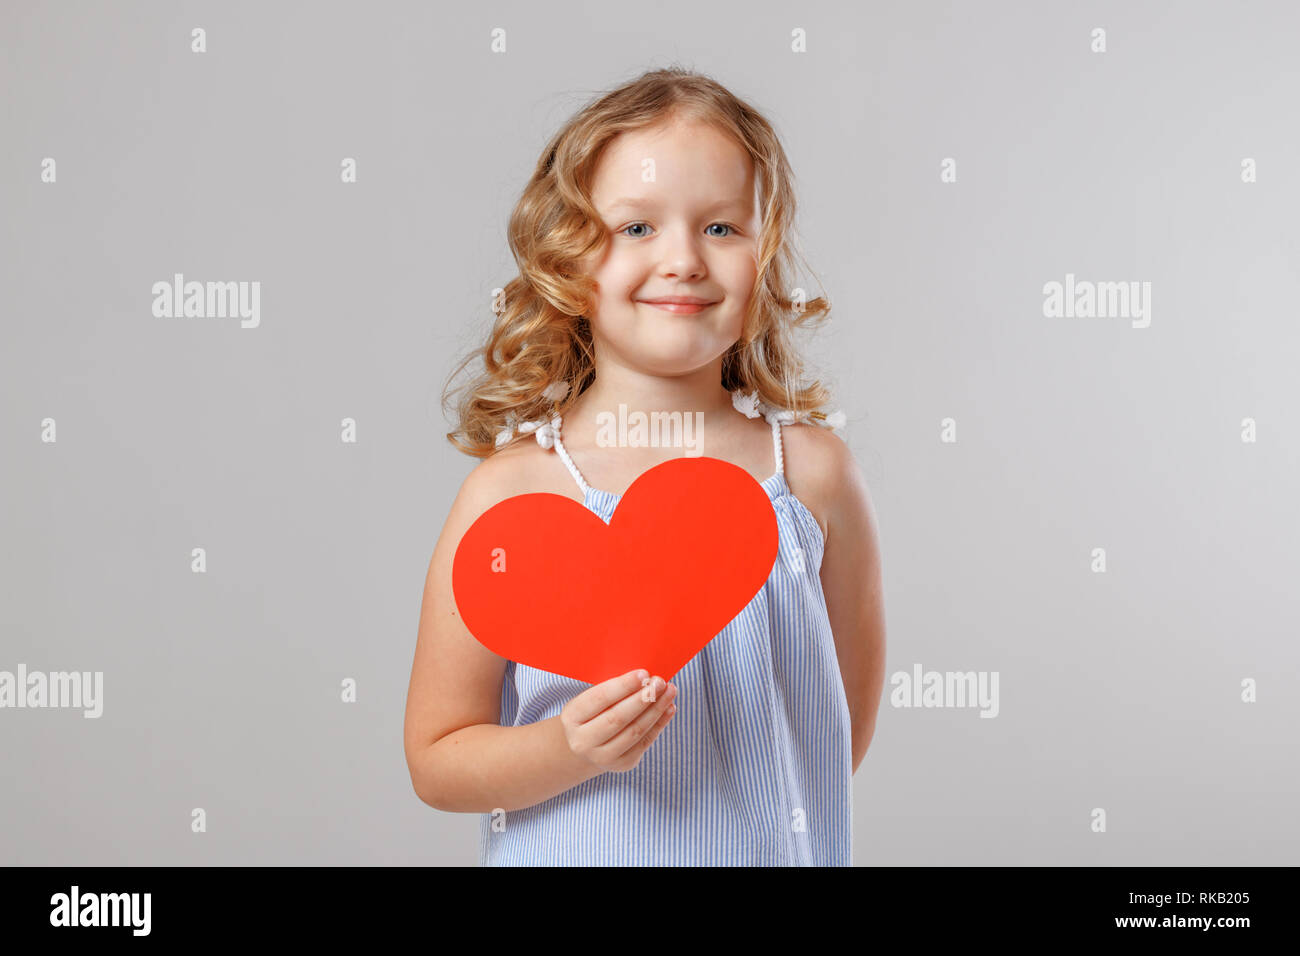 Portrait of an adorable little child girl holding a red paper heart. Gray background, studio Stock Photo